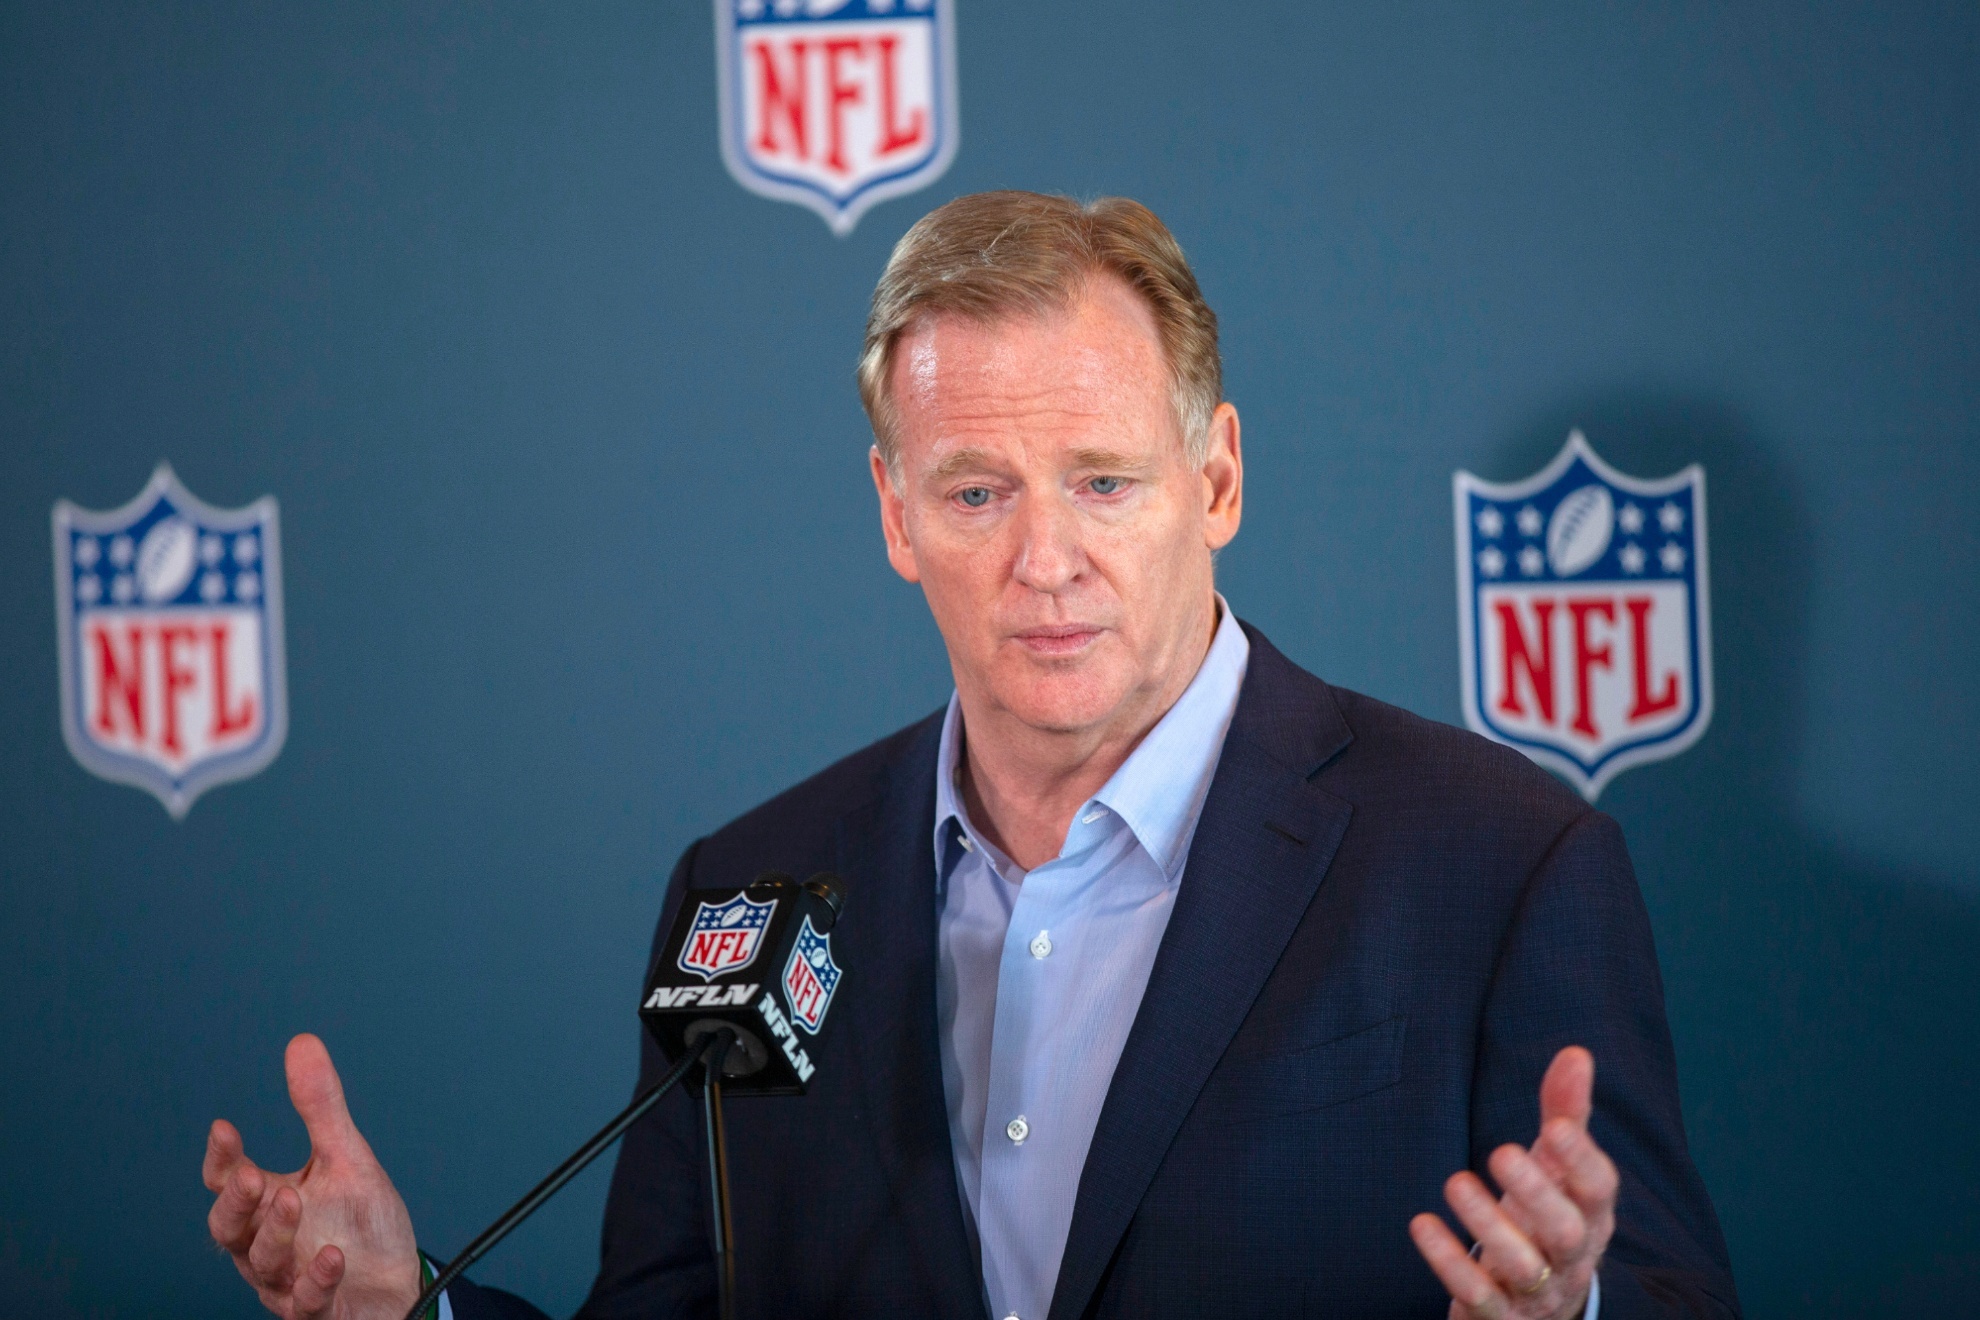 The owners of the NFL are in Minnesota at the traditional annual spring meeting, and the owner of the Indianapolis Colts, Jim Irsay, assured that everyone is ready to extend the contract of commissioner Roger Goodell until 2027.  However, Irsay added that there is nothing concrete yet, as announced through ESPN.  Its not being extended today, thats for sure, said Goodell when asked for a comment about the possibility of a new contract with the league.  He added, I love my job and I have no doubt that both parties will be able to complete the deal.  In March, NFL expert for ESPN, Adam Schefter, reported that it was expected for the league and Goodell to finalize a multi-year extension, as the current commissioners contract expires in 2024, and he has held that position since 2006.  Goodell, 64 years old, pointed out that he has had conversations with officials and team owners to divide his duties into two main roles, one as CEO and the other handling more on-field matters.  Its a healthy discussion we need to have. The job changes over the years, said Goodell. It has changed since I became commissioner. I know we will talk about that issue at the appropriate time.  Goodells Salary  Although he has been the NFL commissioner for 17 years, he had been a part of the leagues main office for several years prior.  The salary in Goodells current contract is $64 million per year, and he has accumulated a fortune of $200 million.  There are reports that Goodell has earned more over the years than any player in NFL history, accumulating a total of over $500 million throughout his tenure as an executive in the NFL.